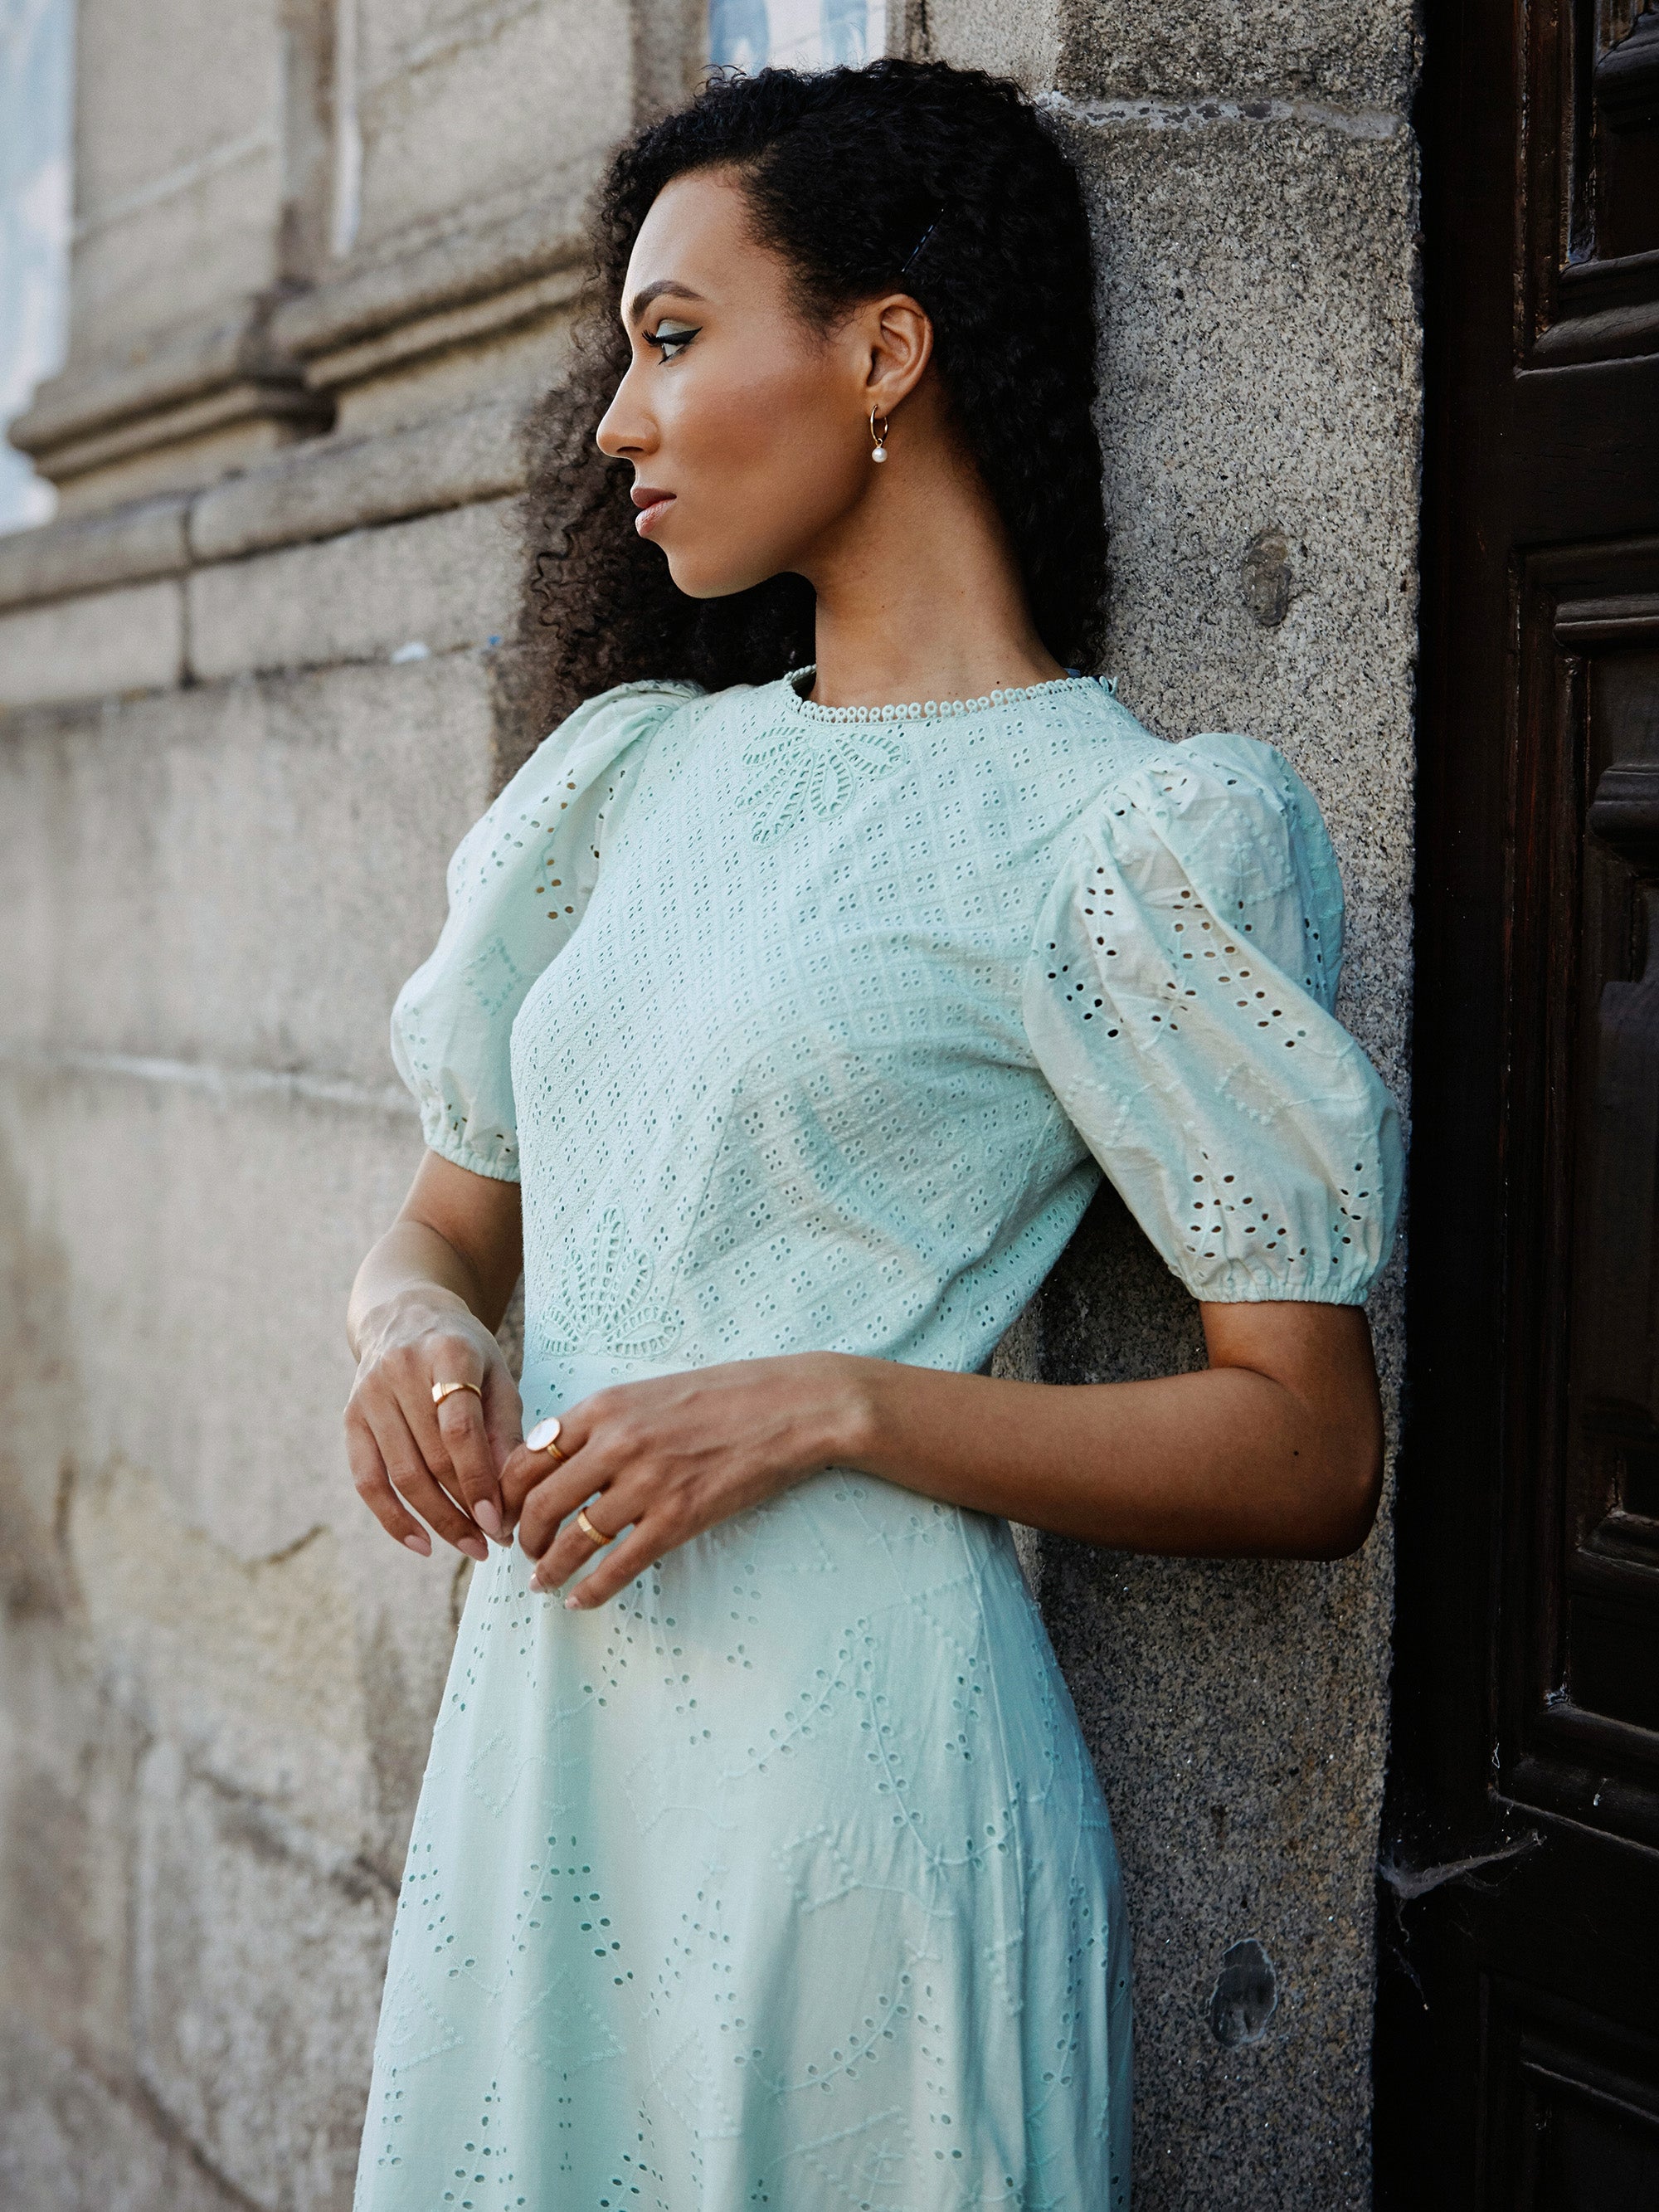 Esse Broderie Puff Sleeve Dress Aqua Foam Green | French Connection UK